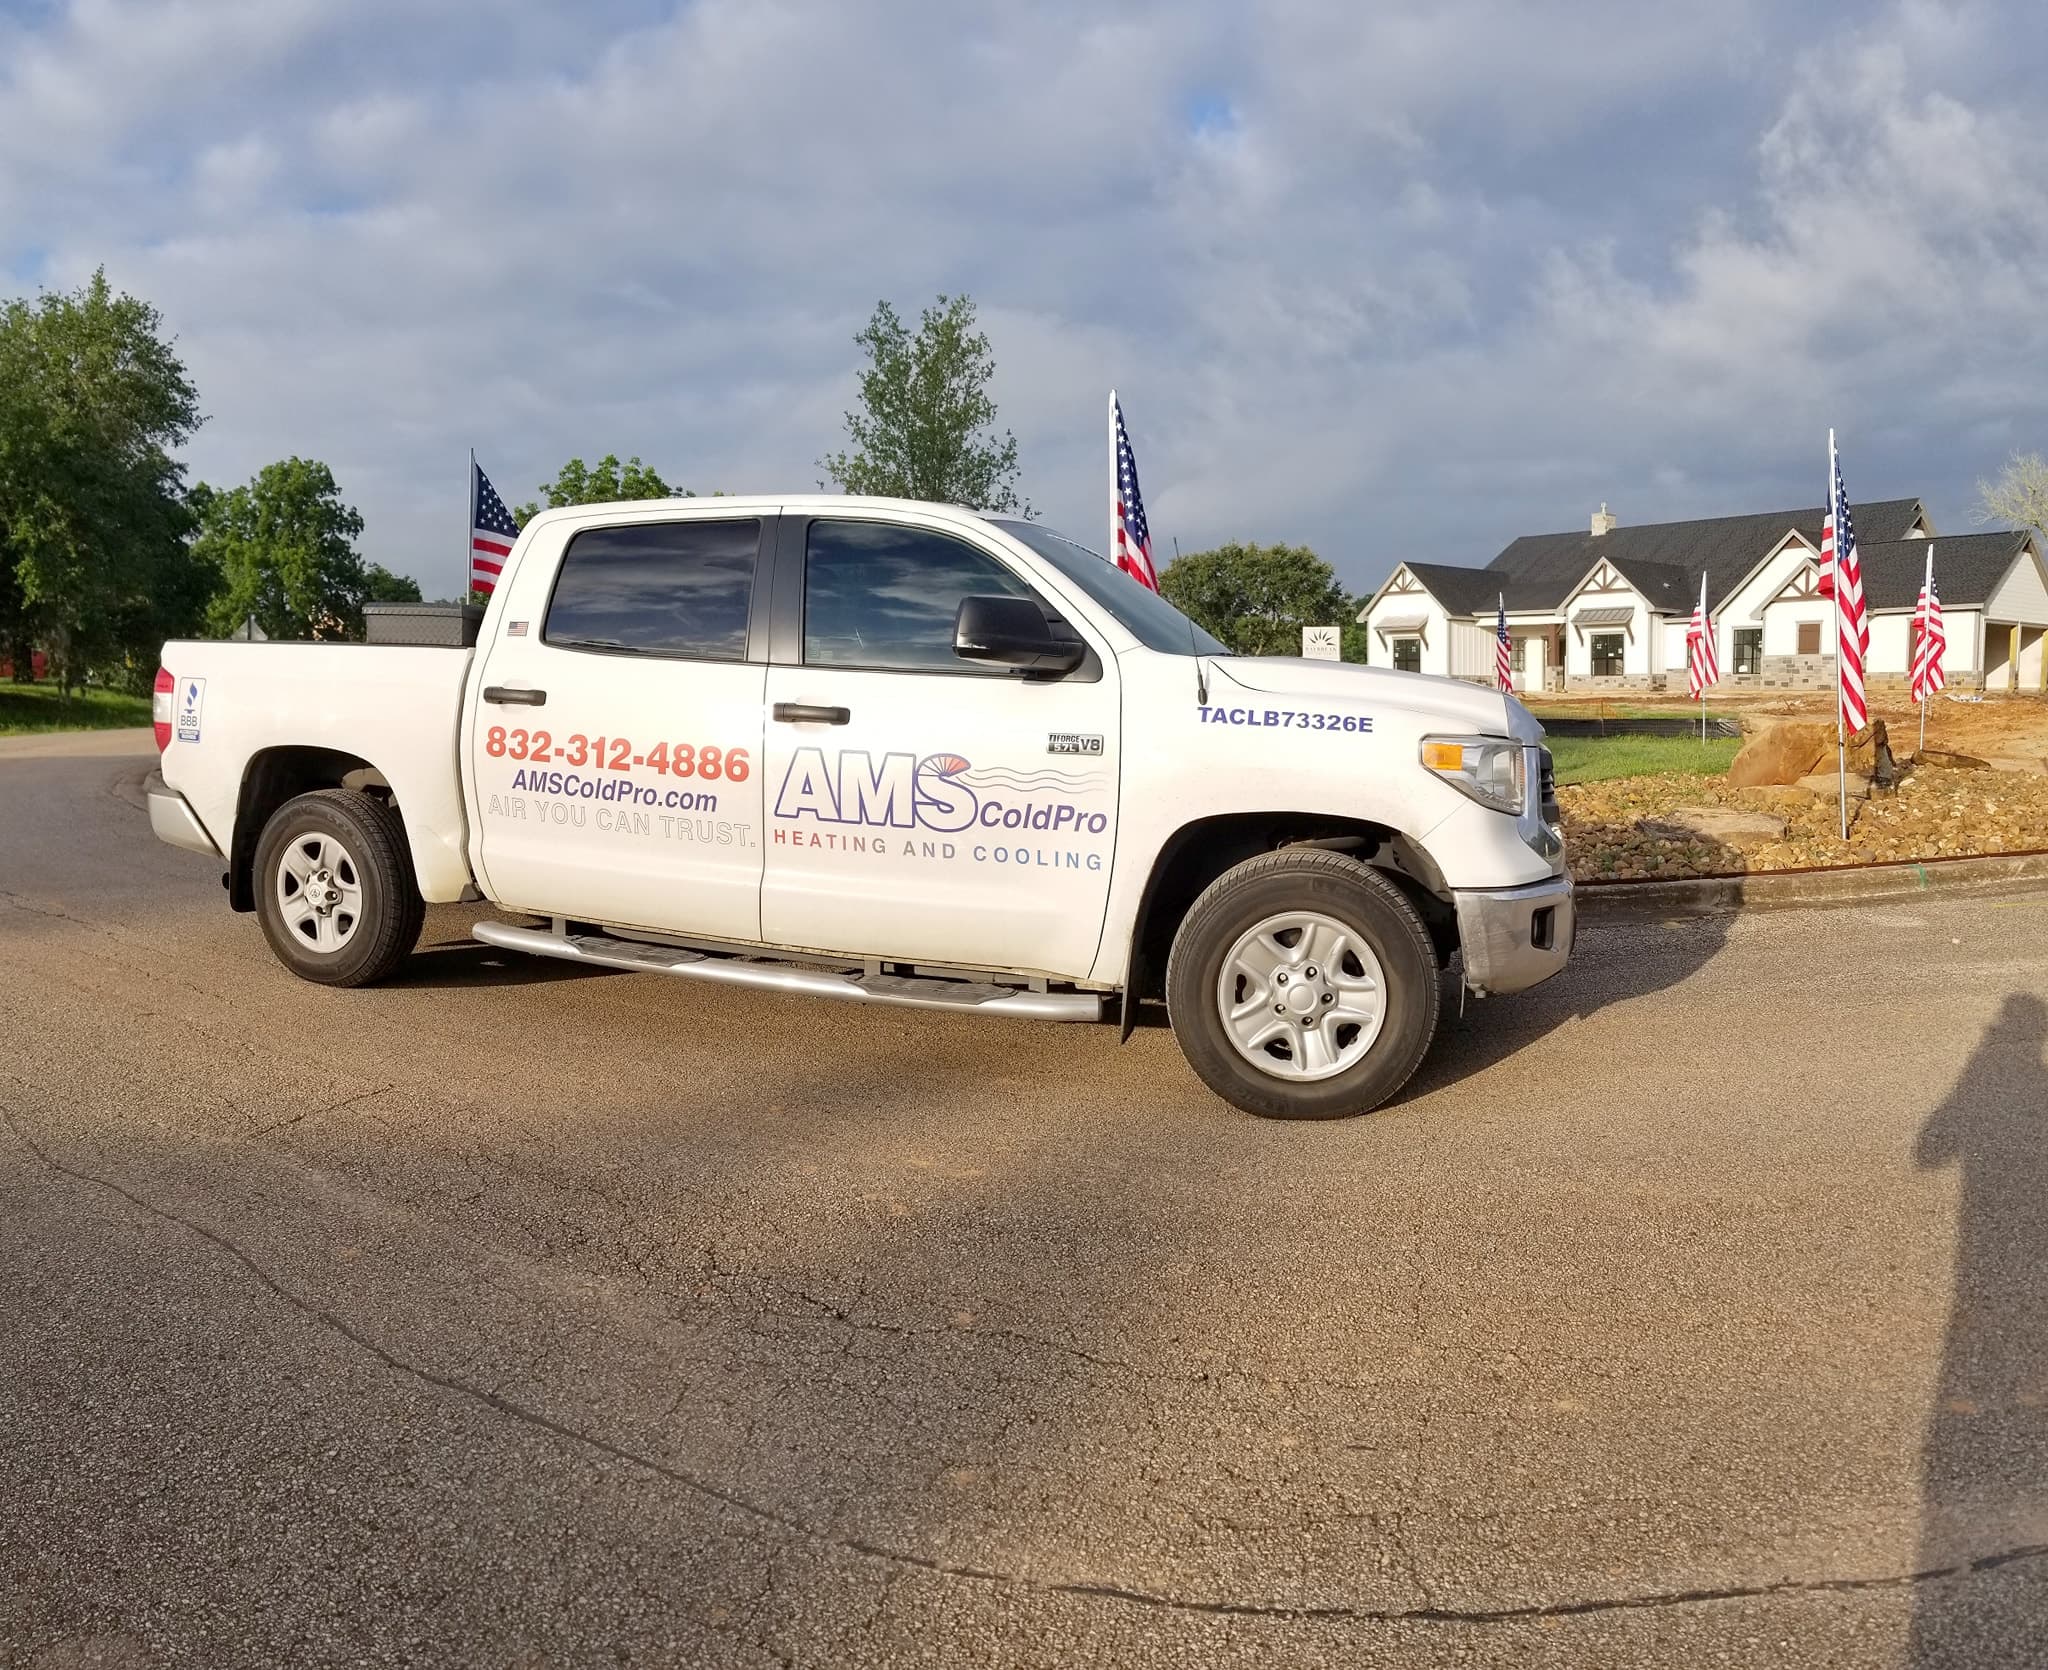 AMS ColdPro - Katy, TX, US, air conditioning companies near me